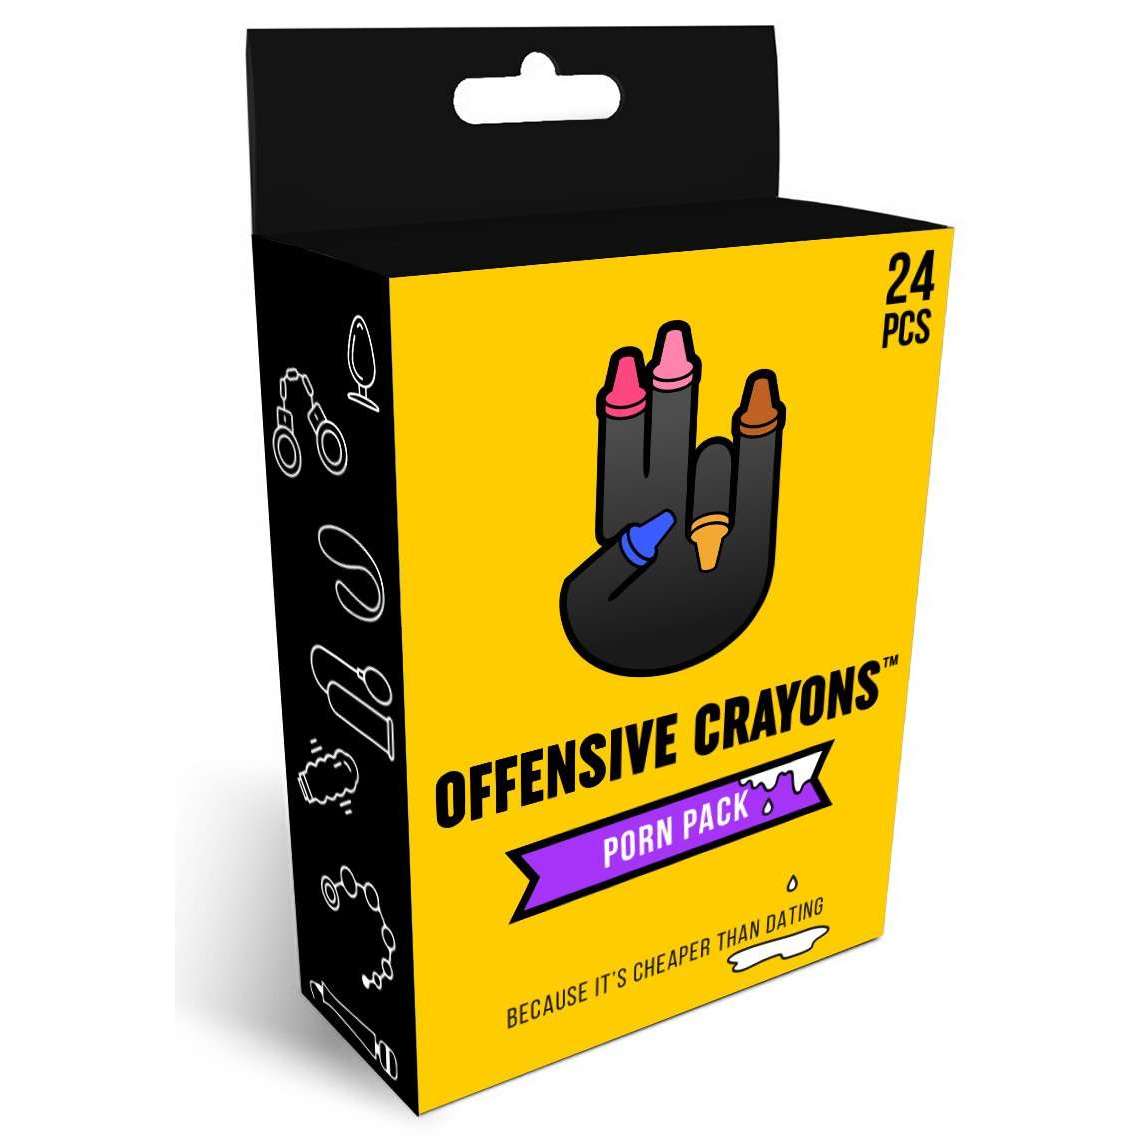 We know you're into feet, cat girls, - Offensive Crayons